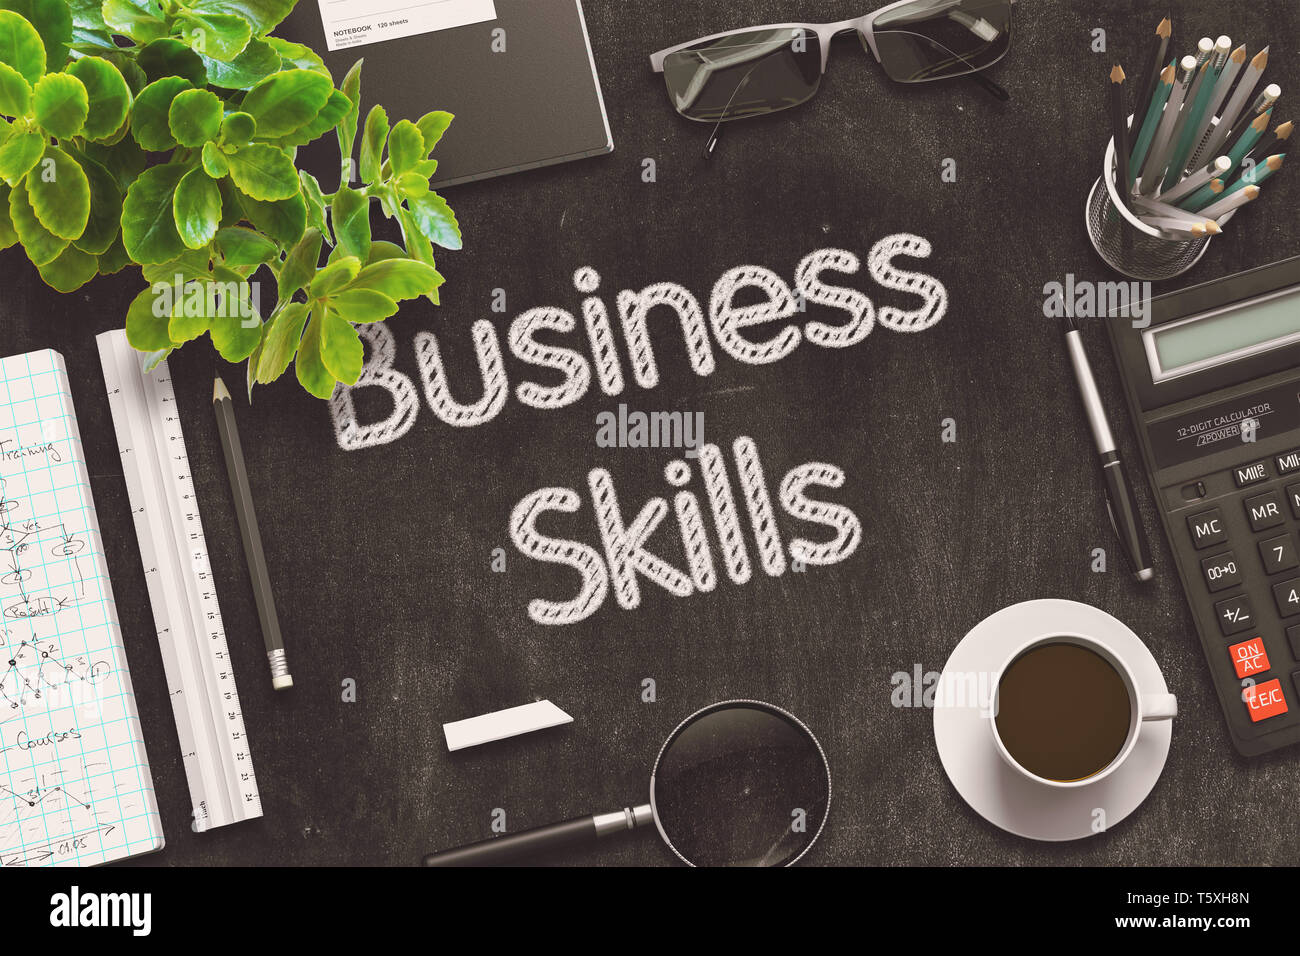 Business Skills. Business Concept Handwritten on Black Chalkboard. Top View Composition with Chalkboard and Office Supplies. 3d Rendering. Toned Illus Stock Photo